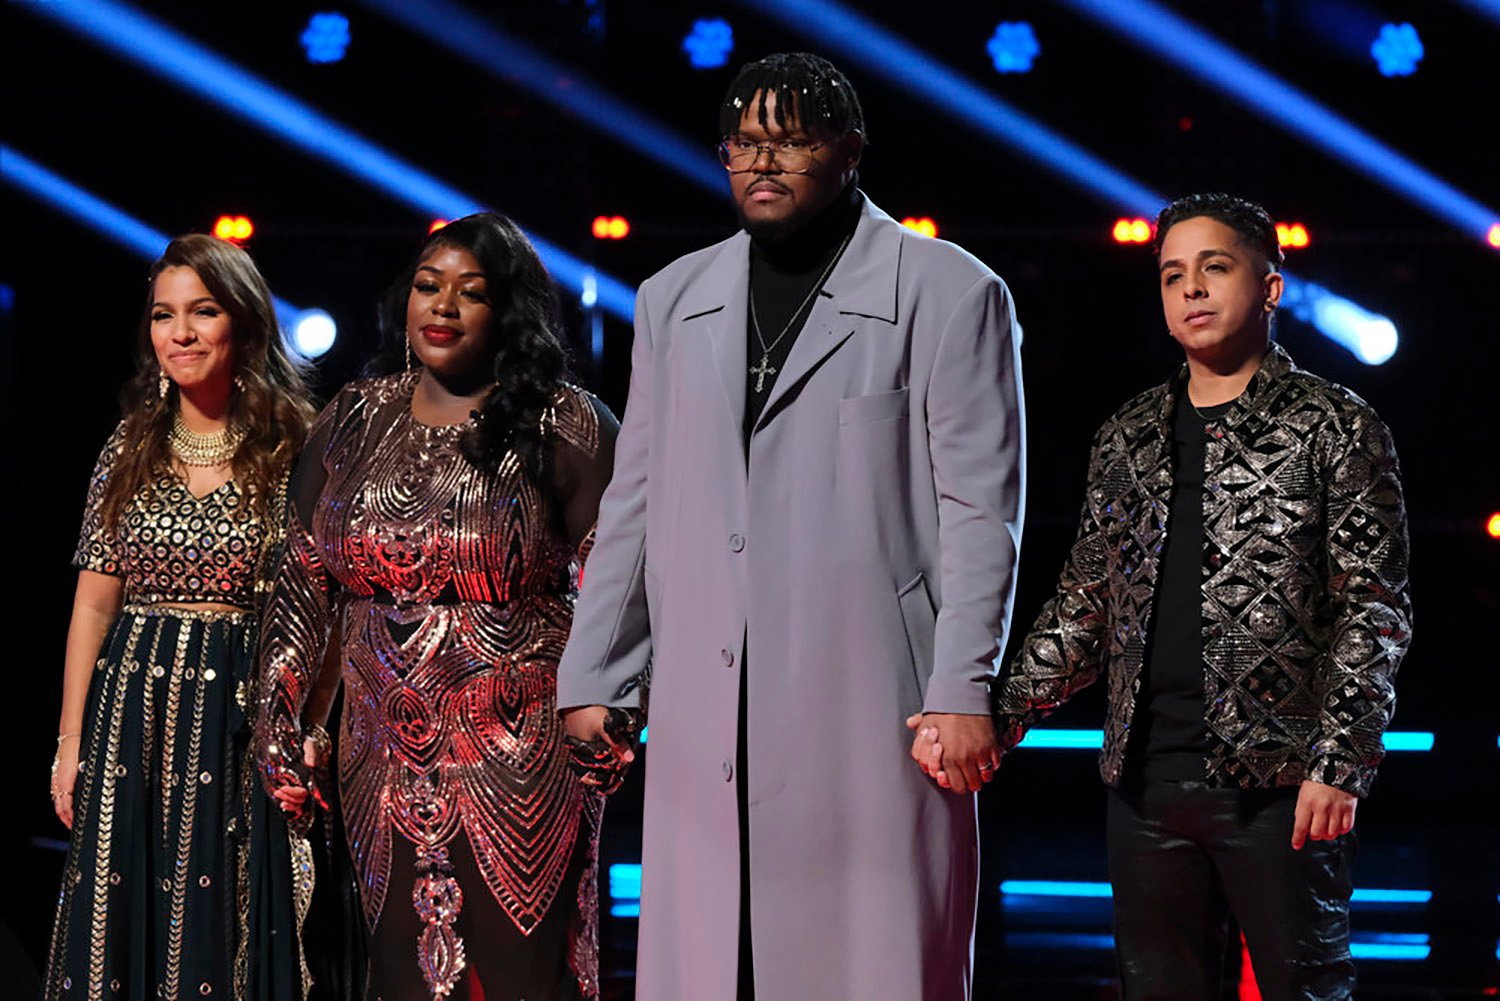 The bottom four artists on The Voice 2022, Parijita Bastola, Kim Cruse, Justin Aaron, and Omar Jose Cardona, await results after fighting for their spot with the other finalists.